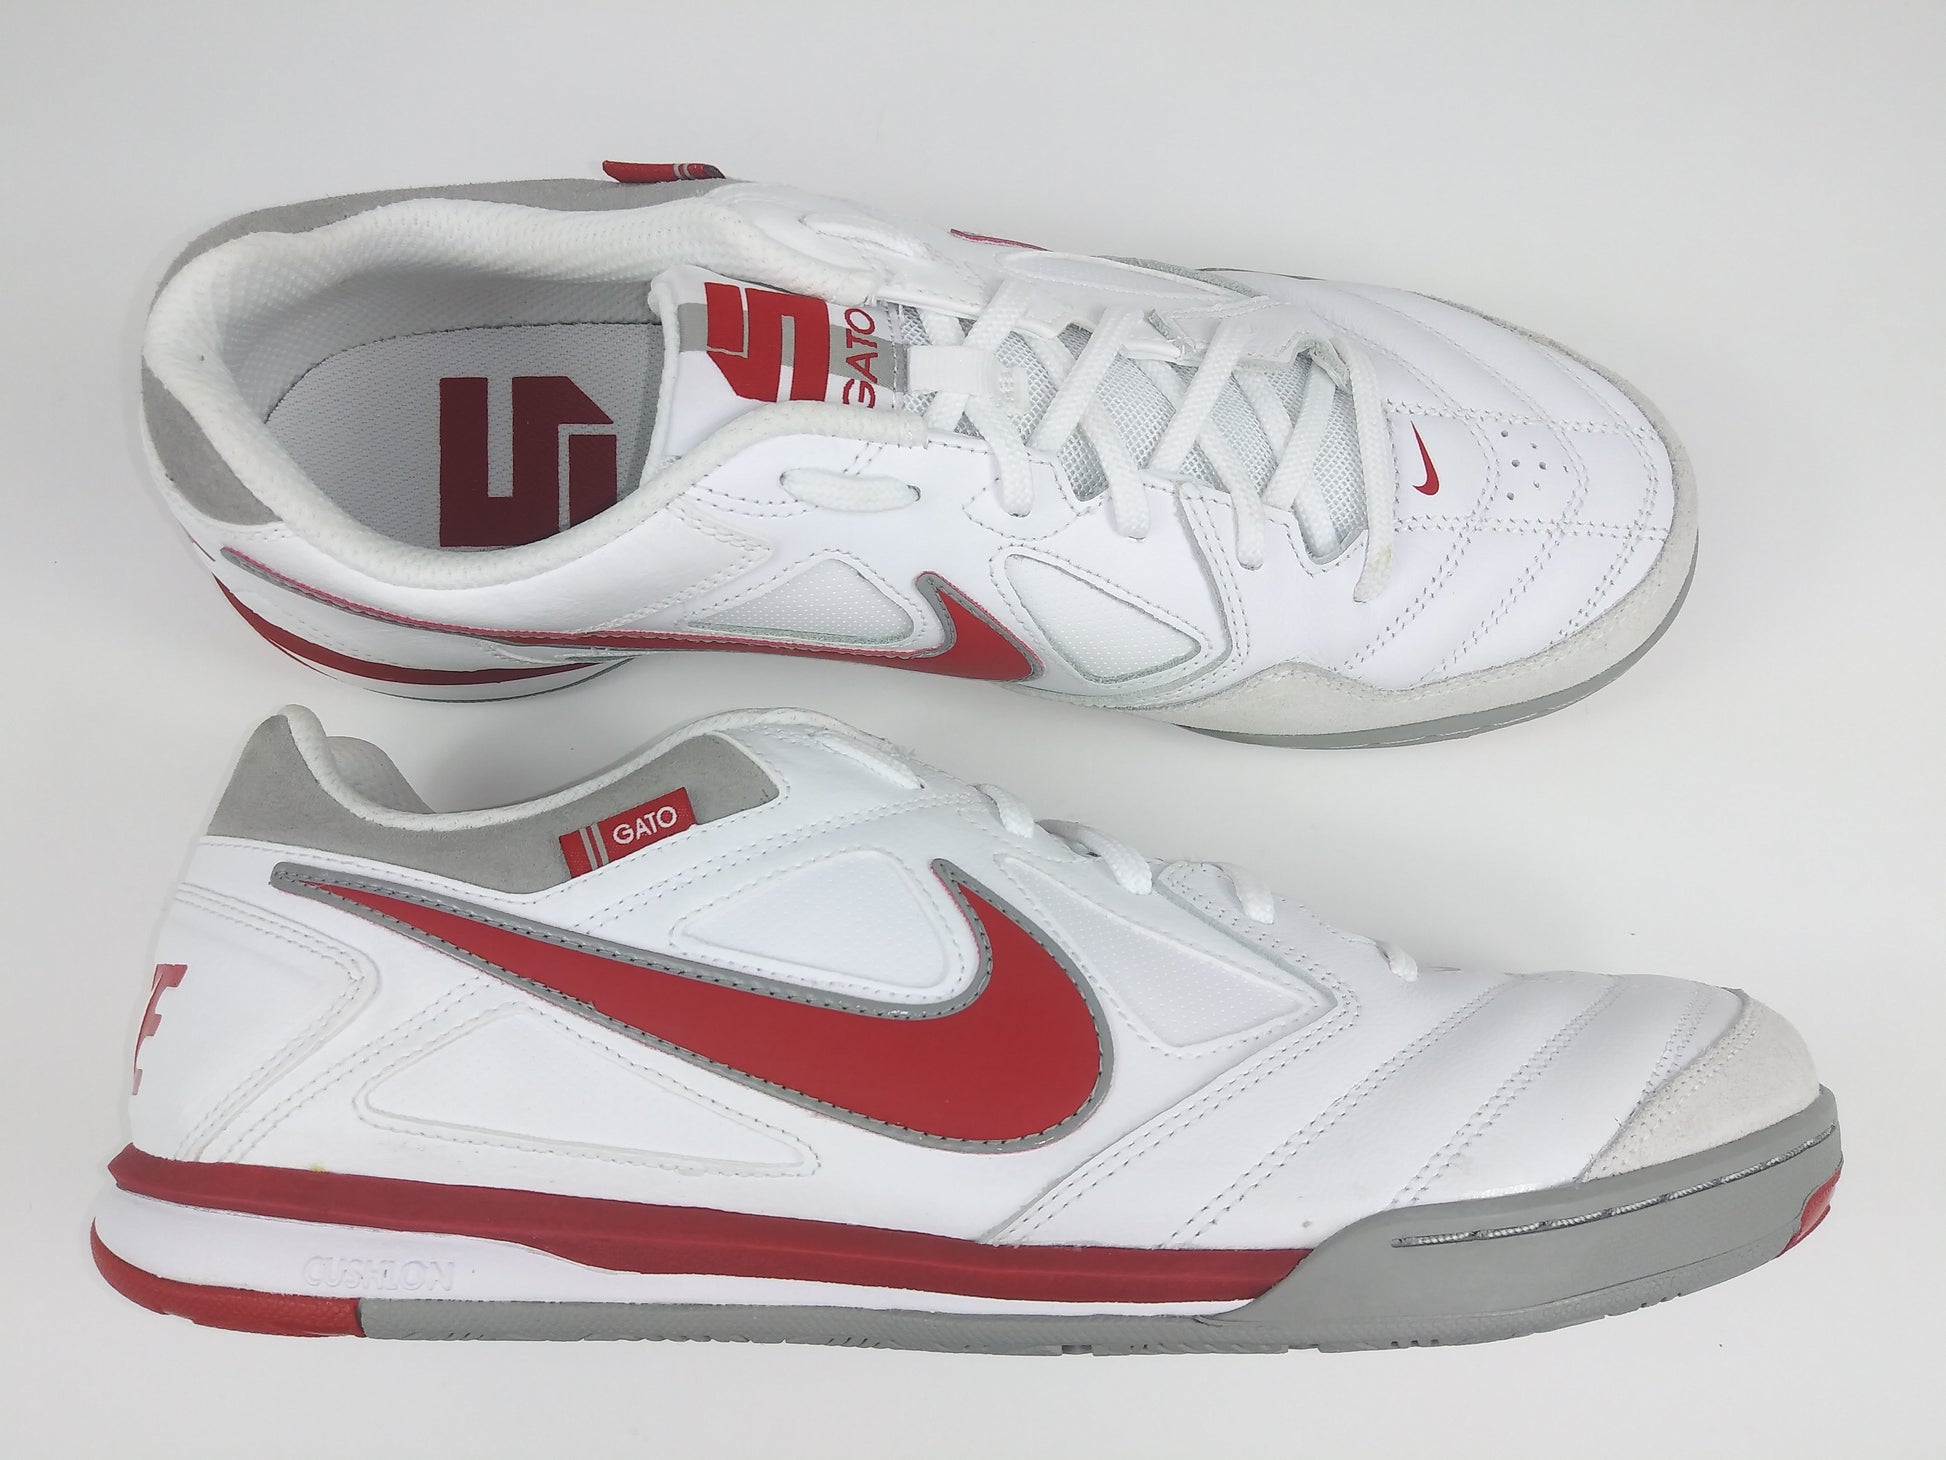 Nike5 Gato LTR Indoor Shoes White Red – Footwear